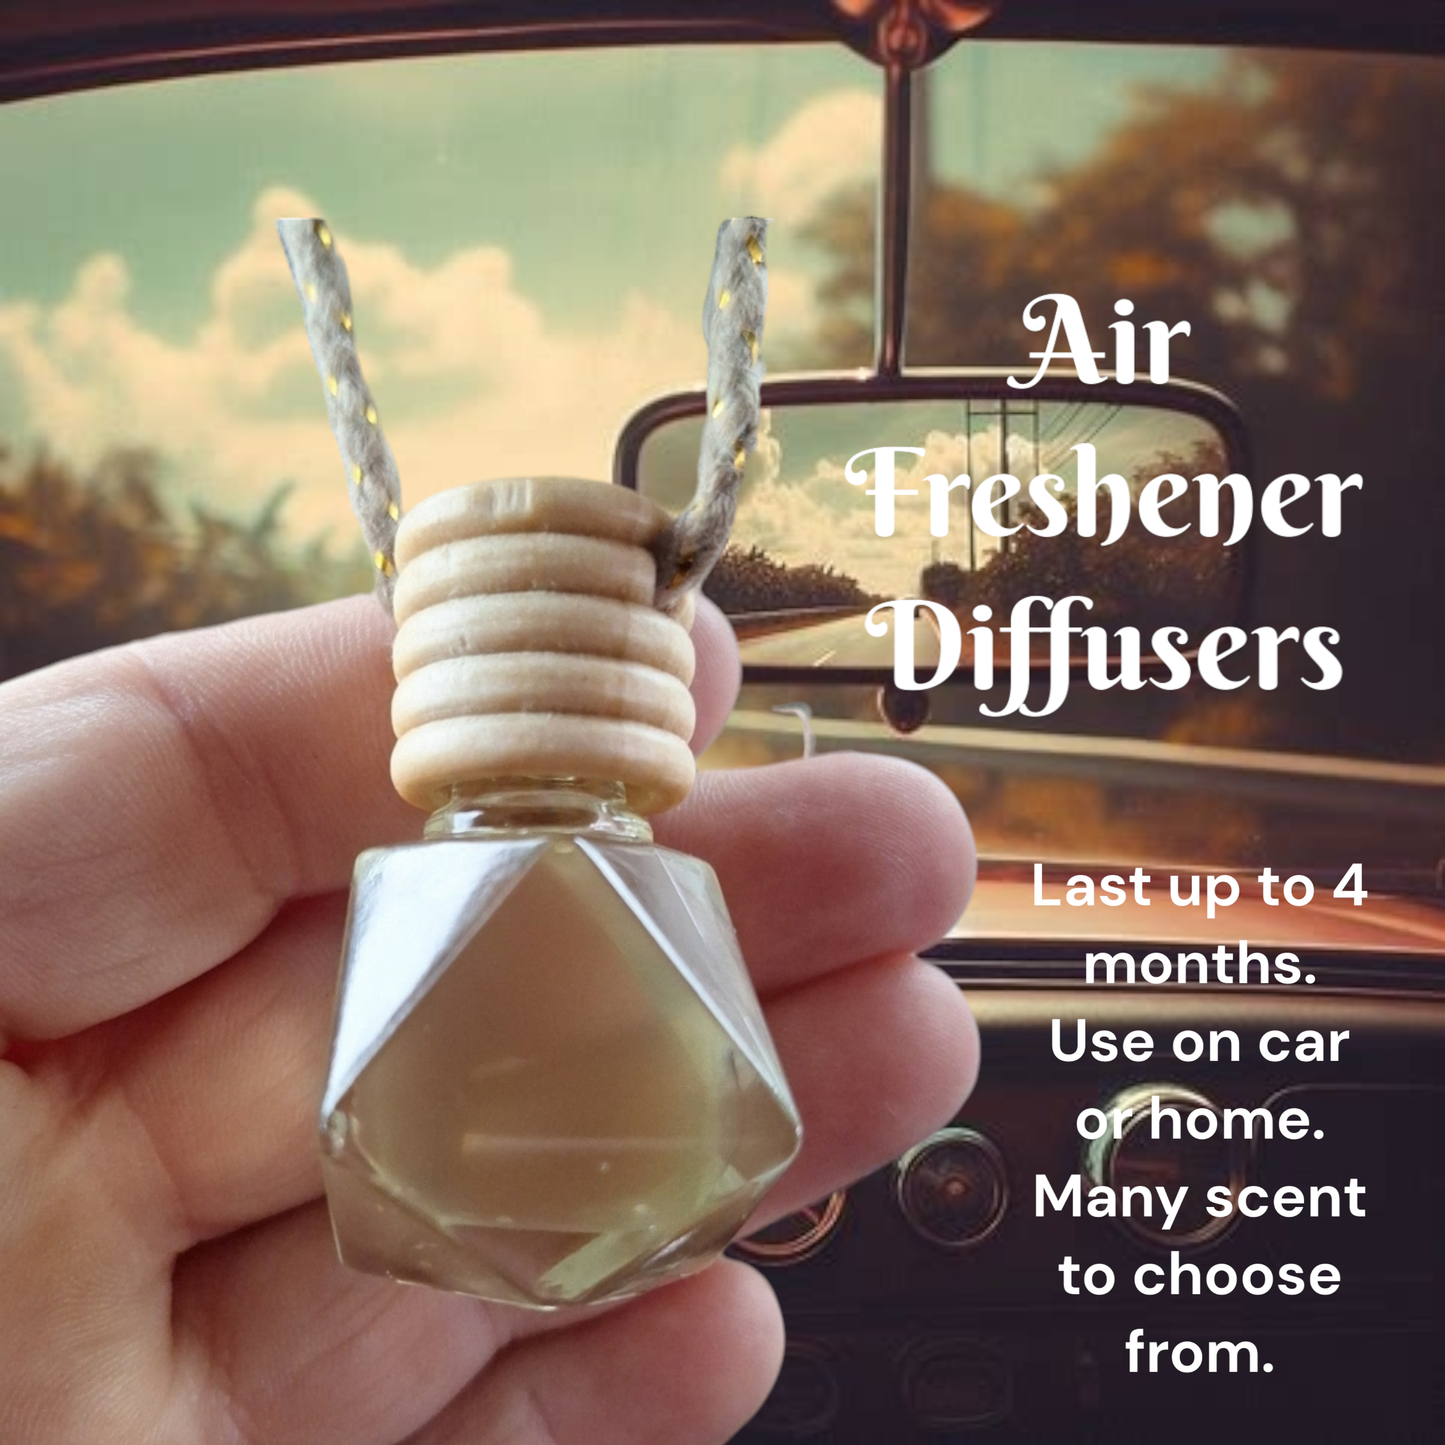 Home For Christmas Air Freshener Diffuser for your car or home.